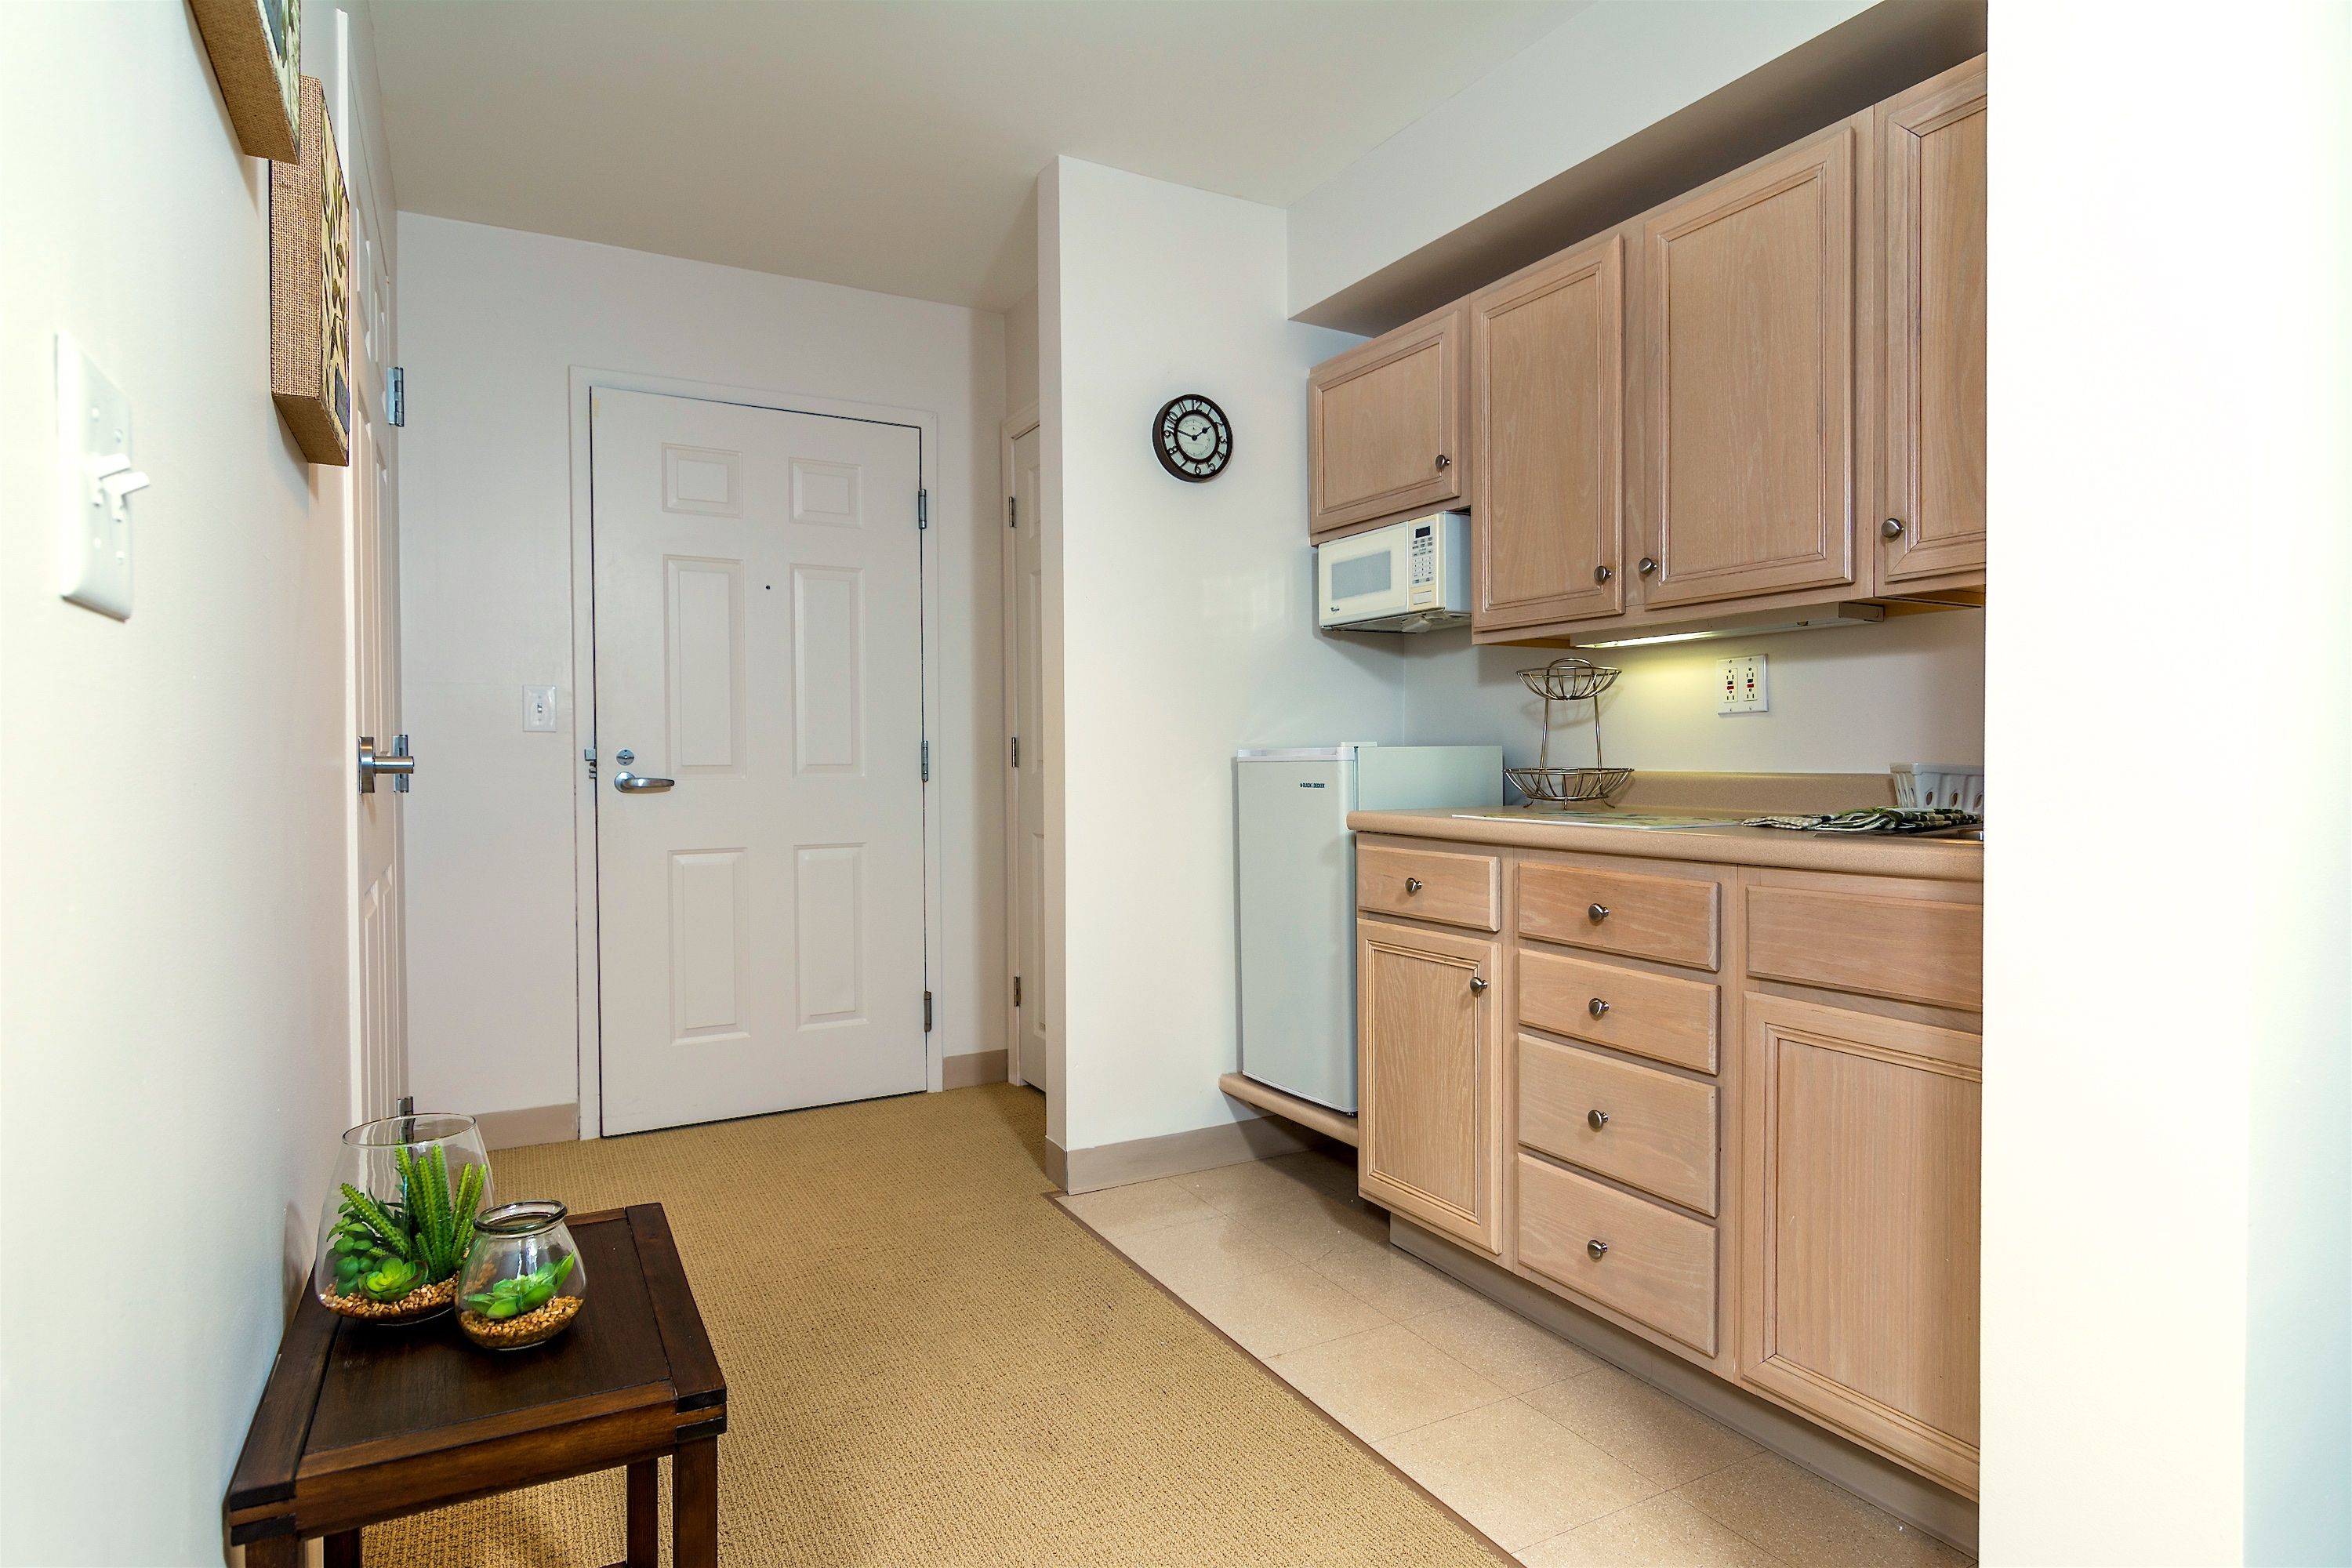 Interior view of Pacifica Senior Living Victoria Court featuring a well-equipped kitchen and cozy decor.